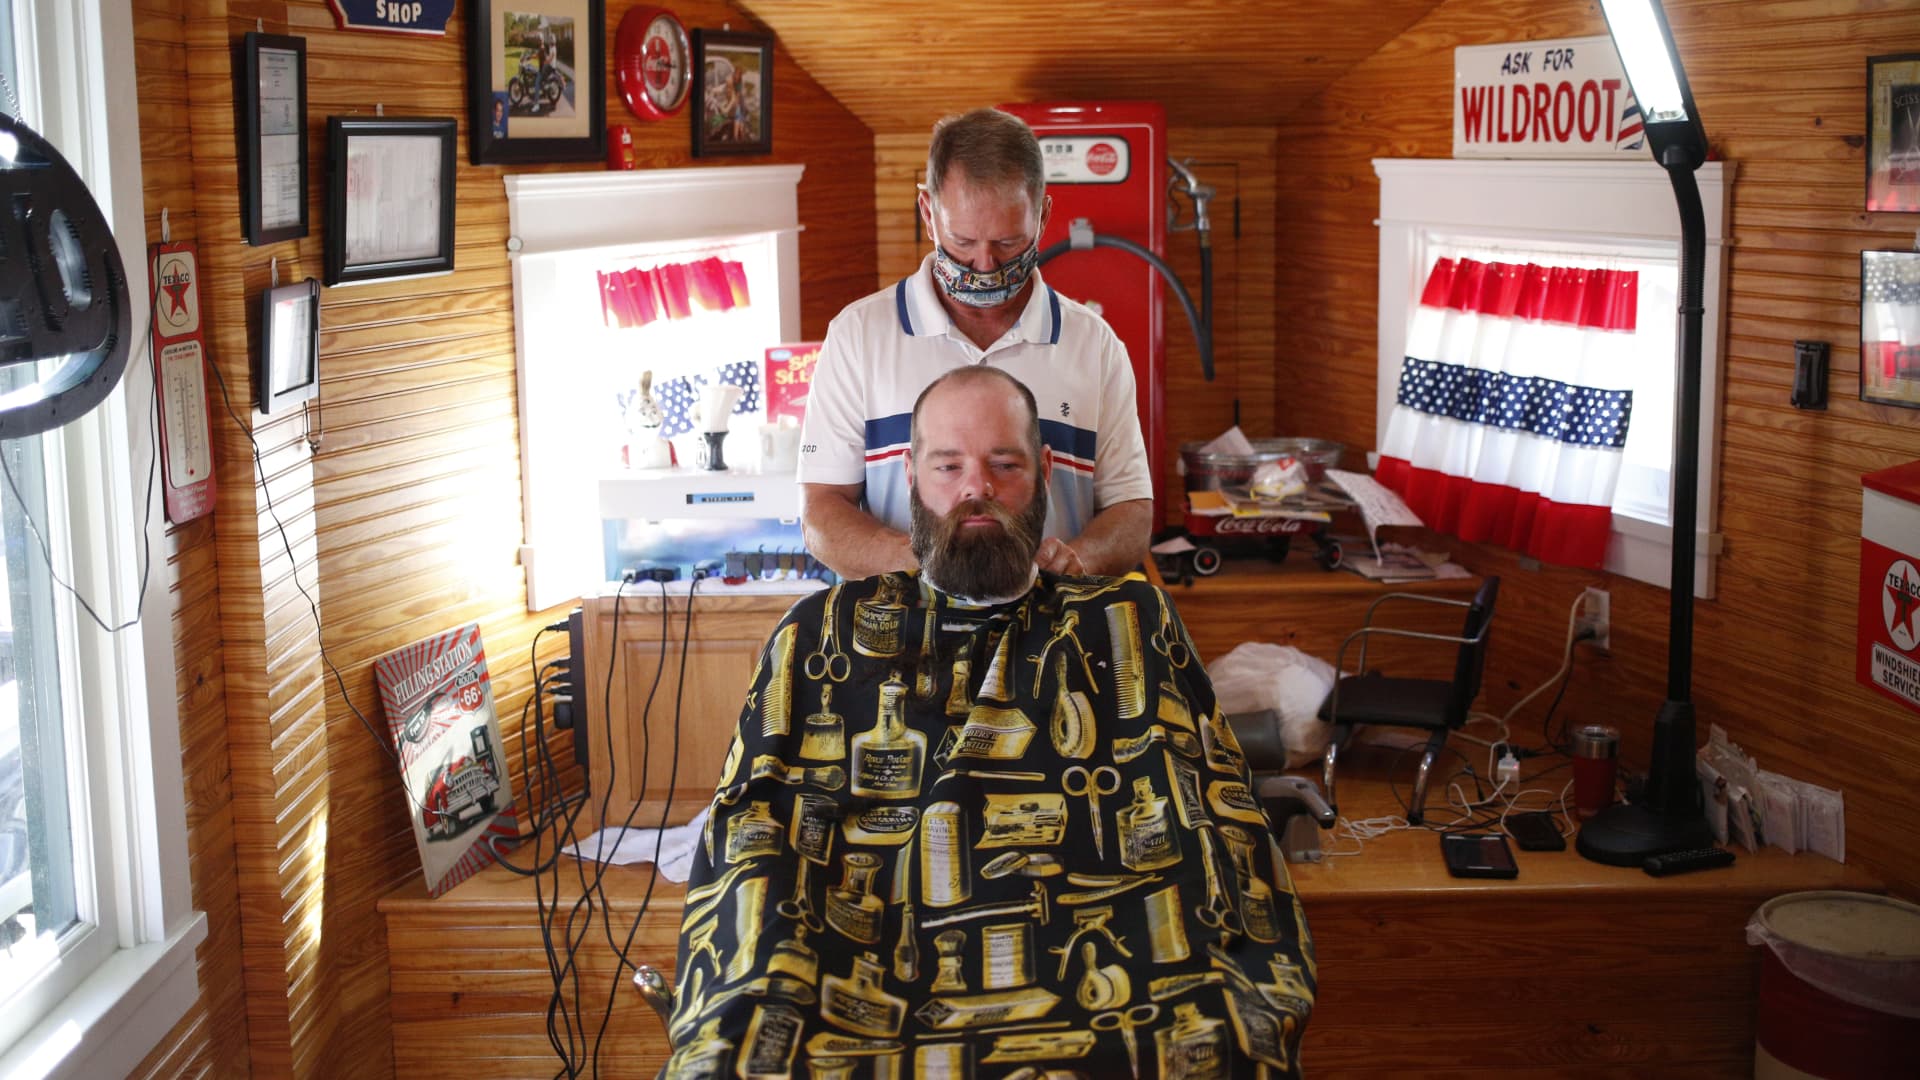 A customer gets a haircut at John's Barber Shop in Knoxville, Tennessee, May 1, 2020.